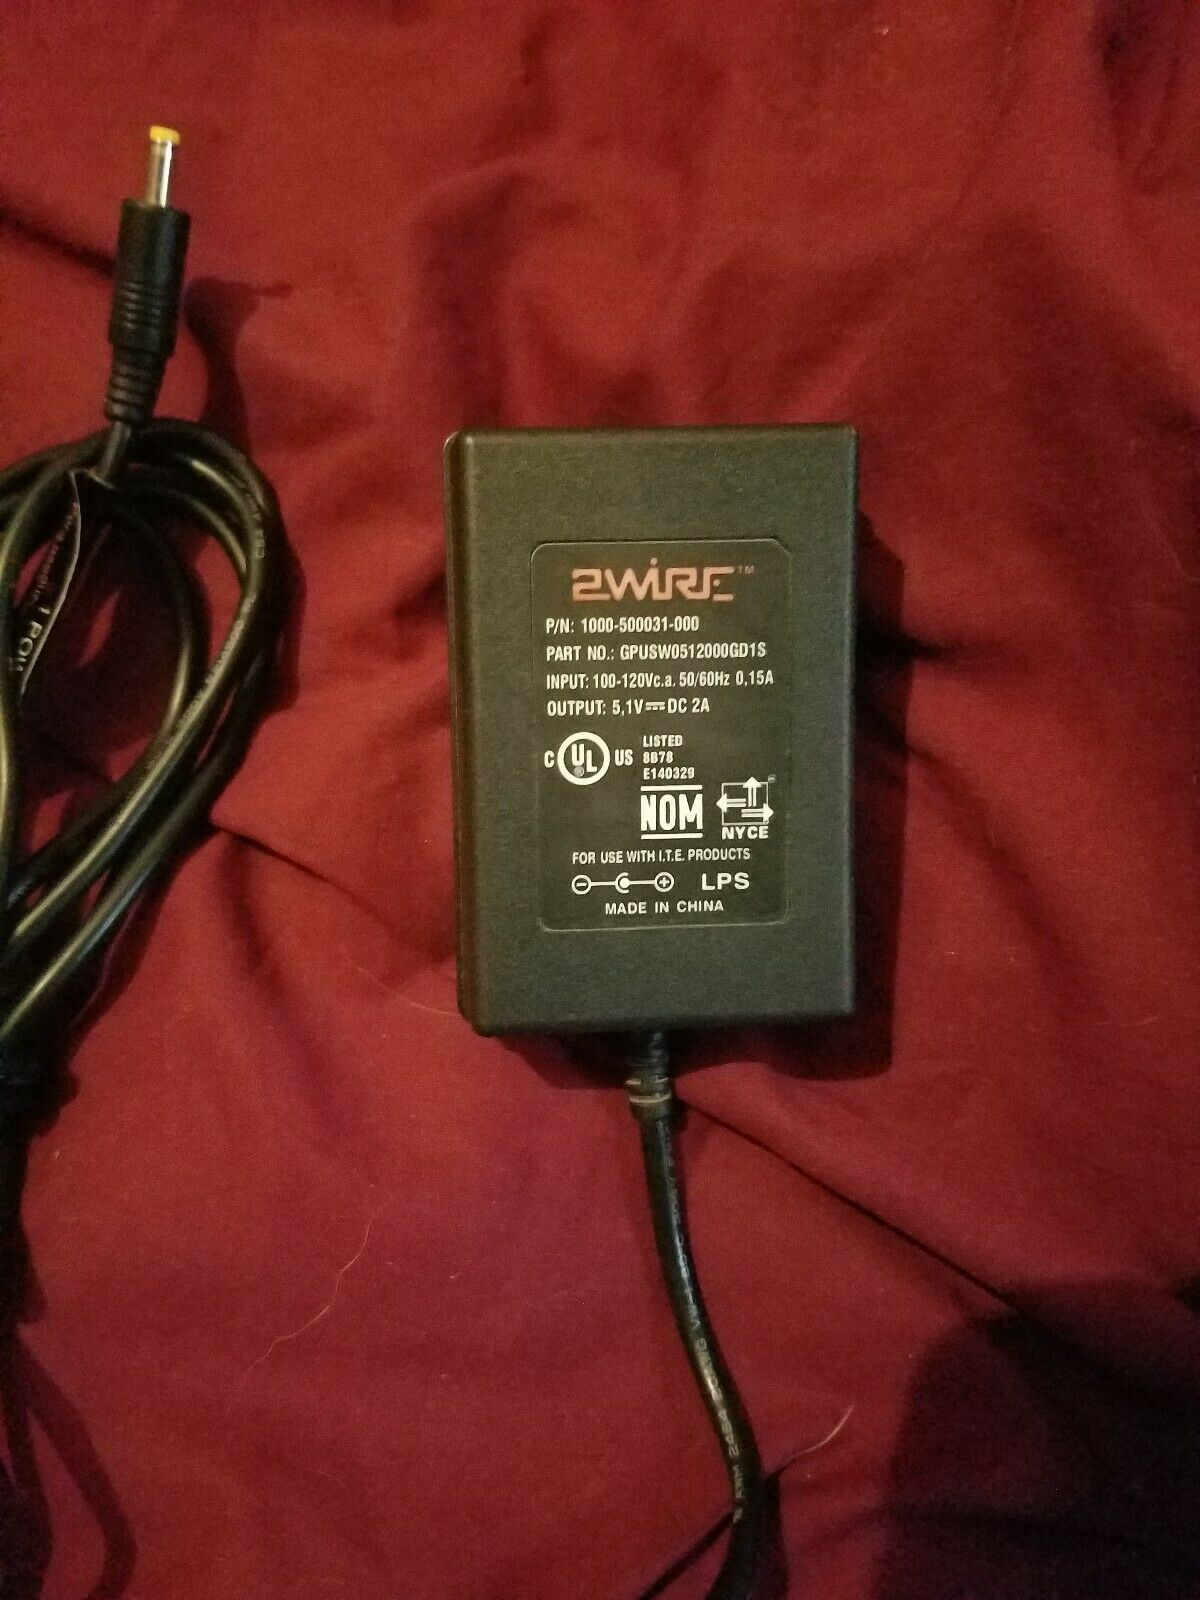 1000-500031-000 2 Wire 5.1V 2A (+) tip AC Adapter Power Supply Genuine Part Brand: 2 Wire Model: 1000-500031-000